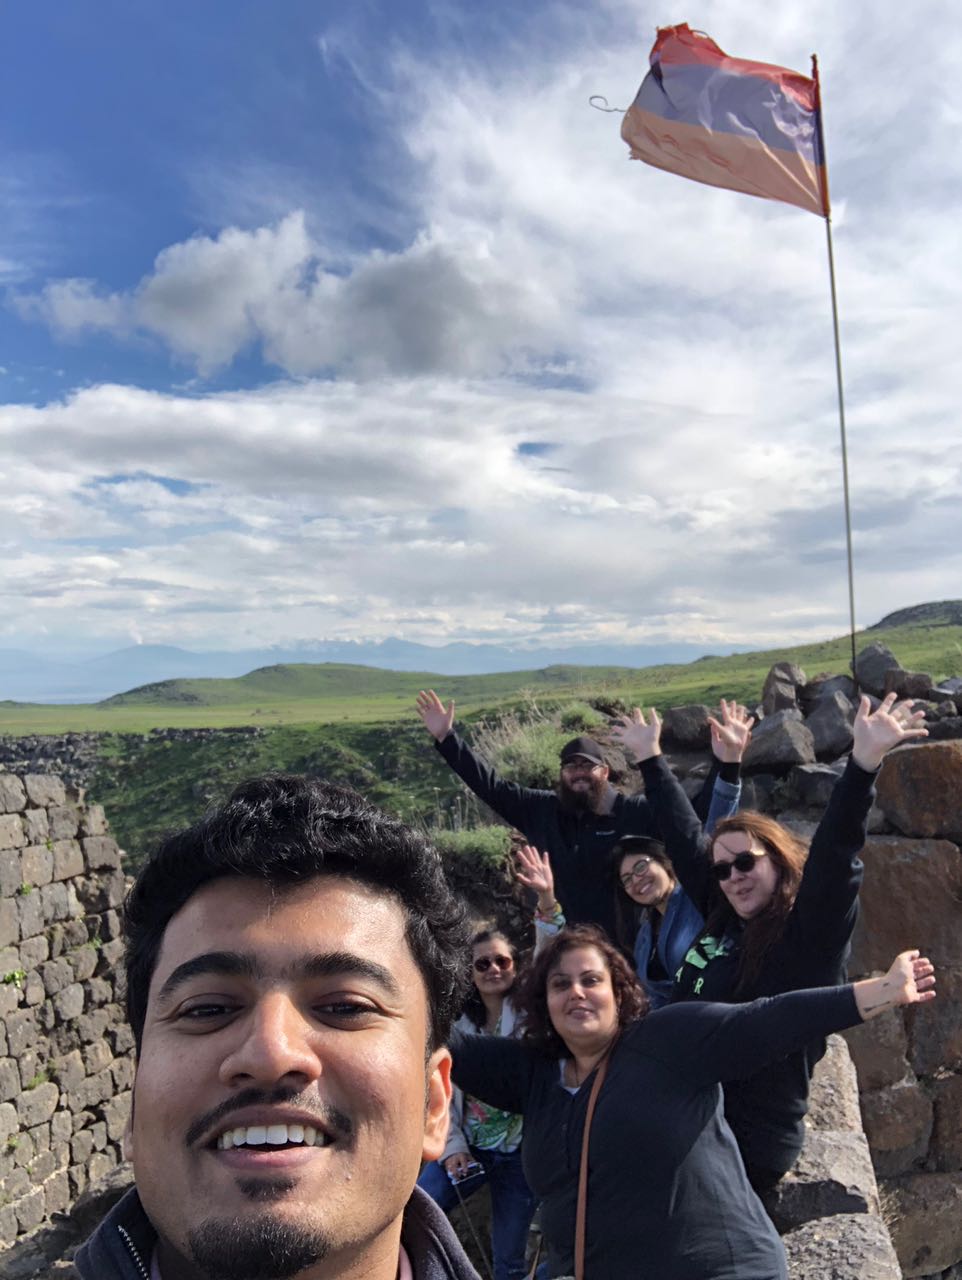 Celebrating a successful hike to the top of the Amberd fortress